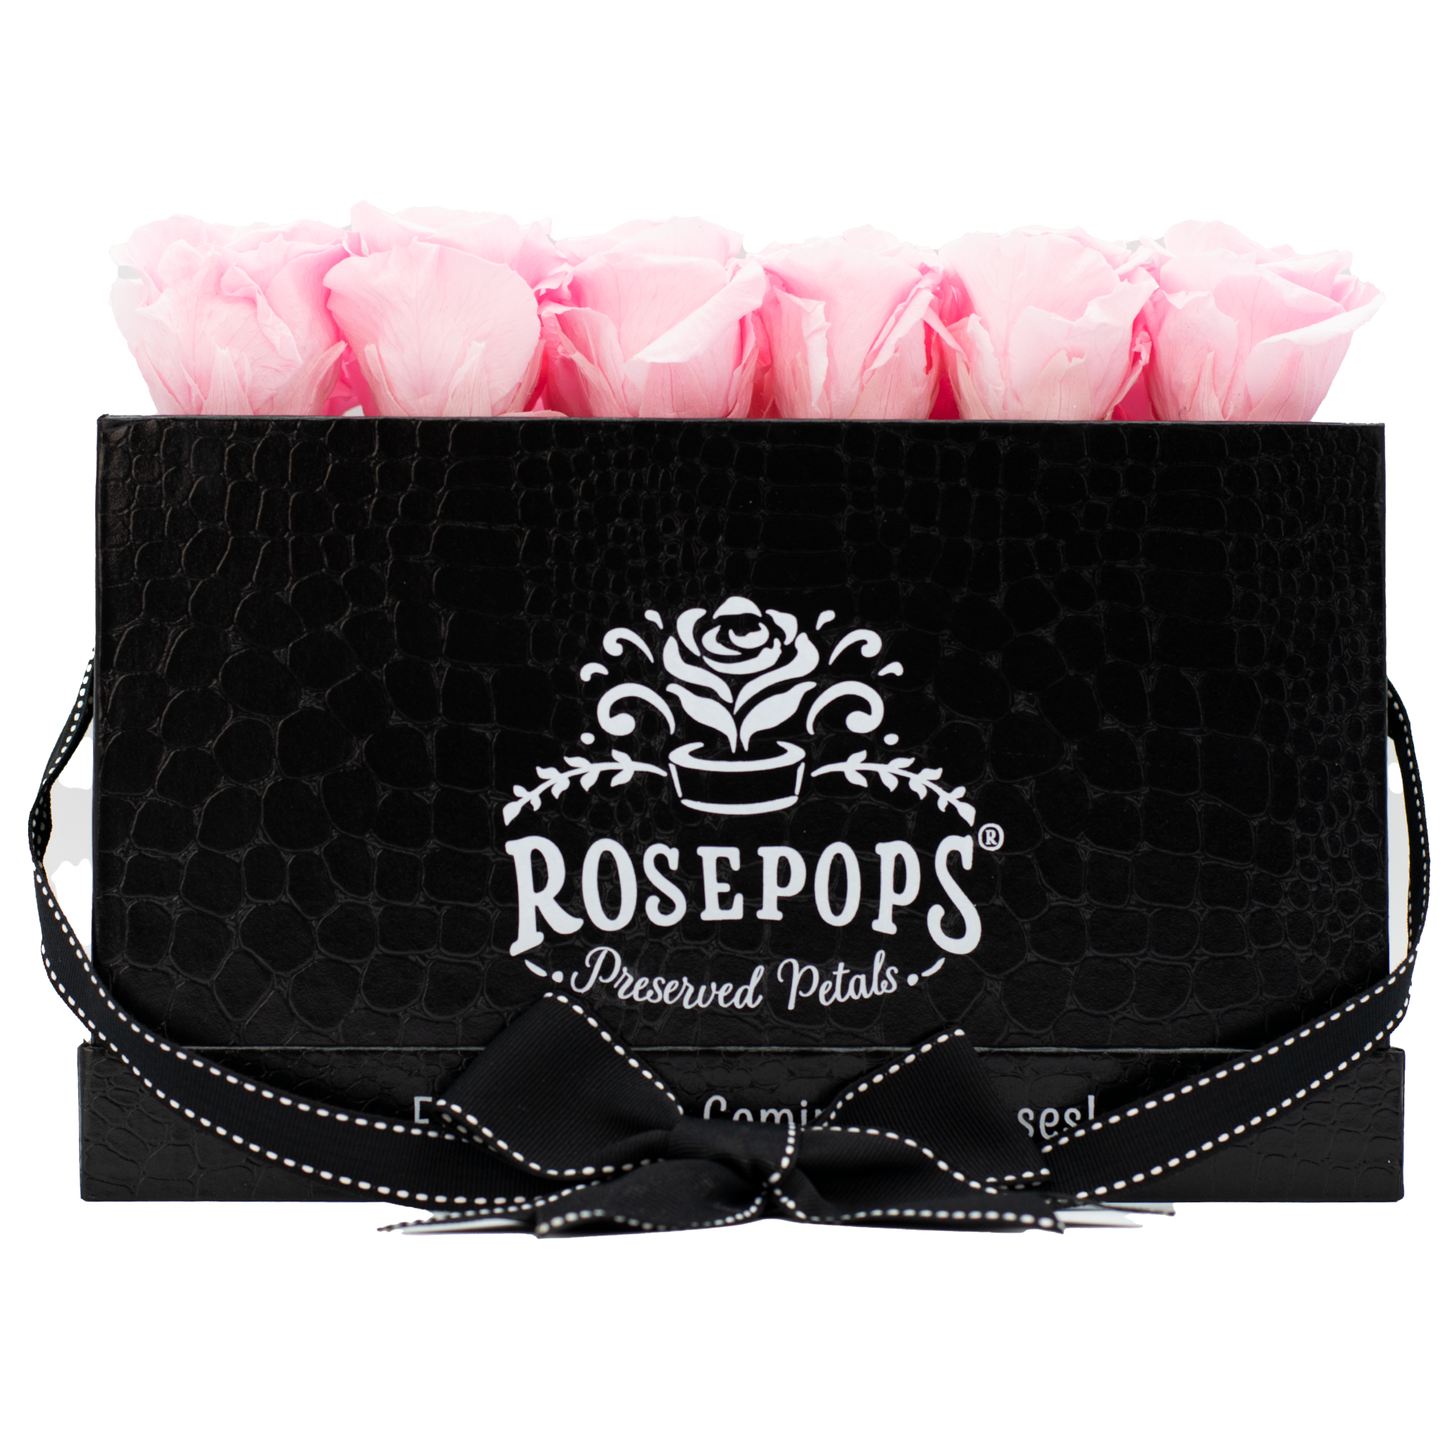 The Black Monogrammed Pop of the Line - Cotton Candy Roses